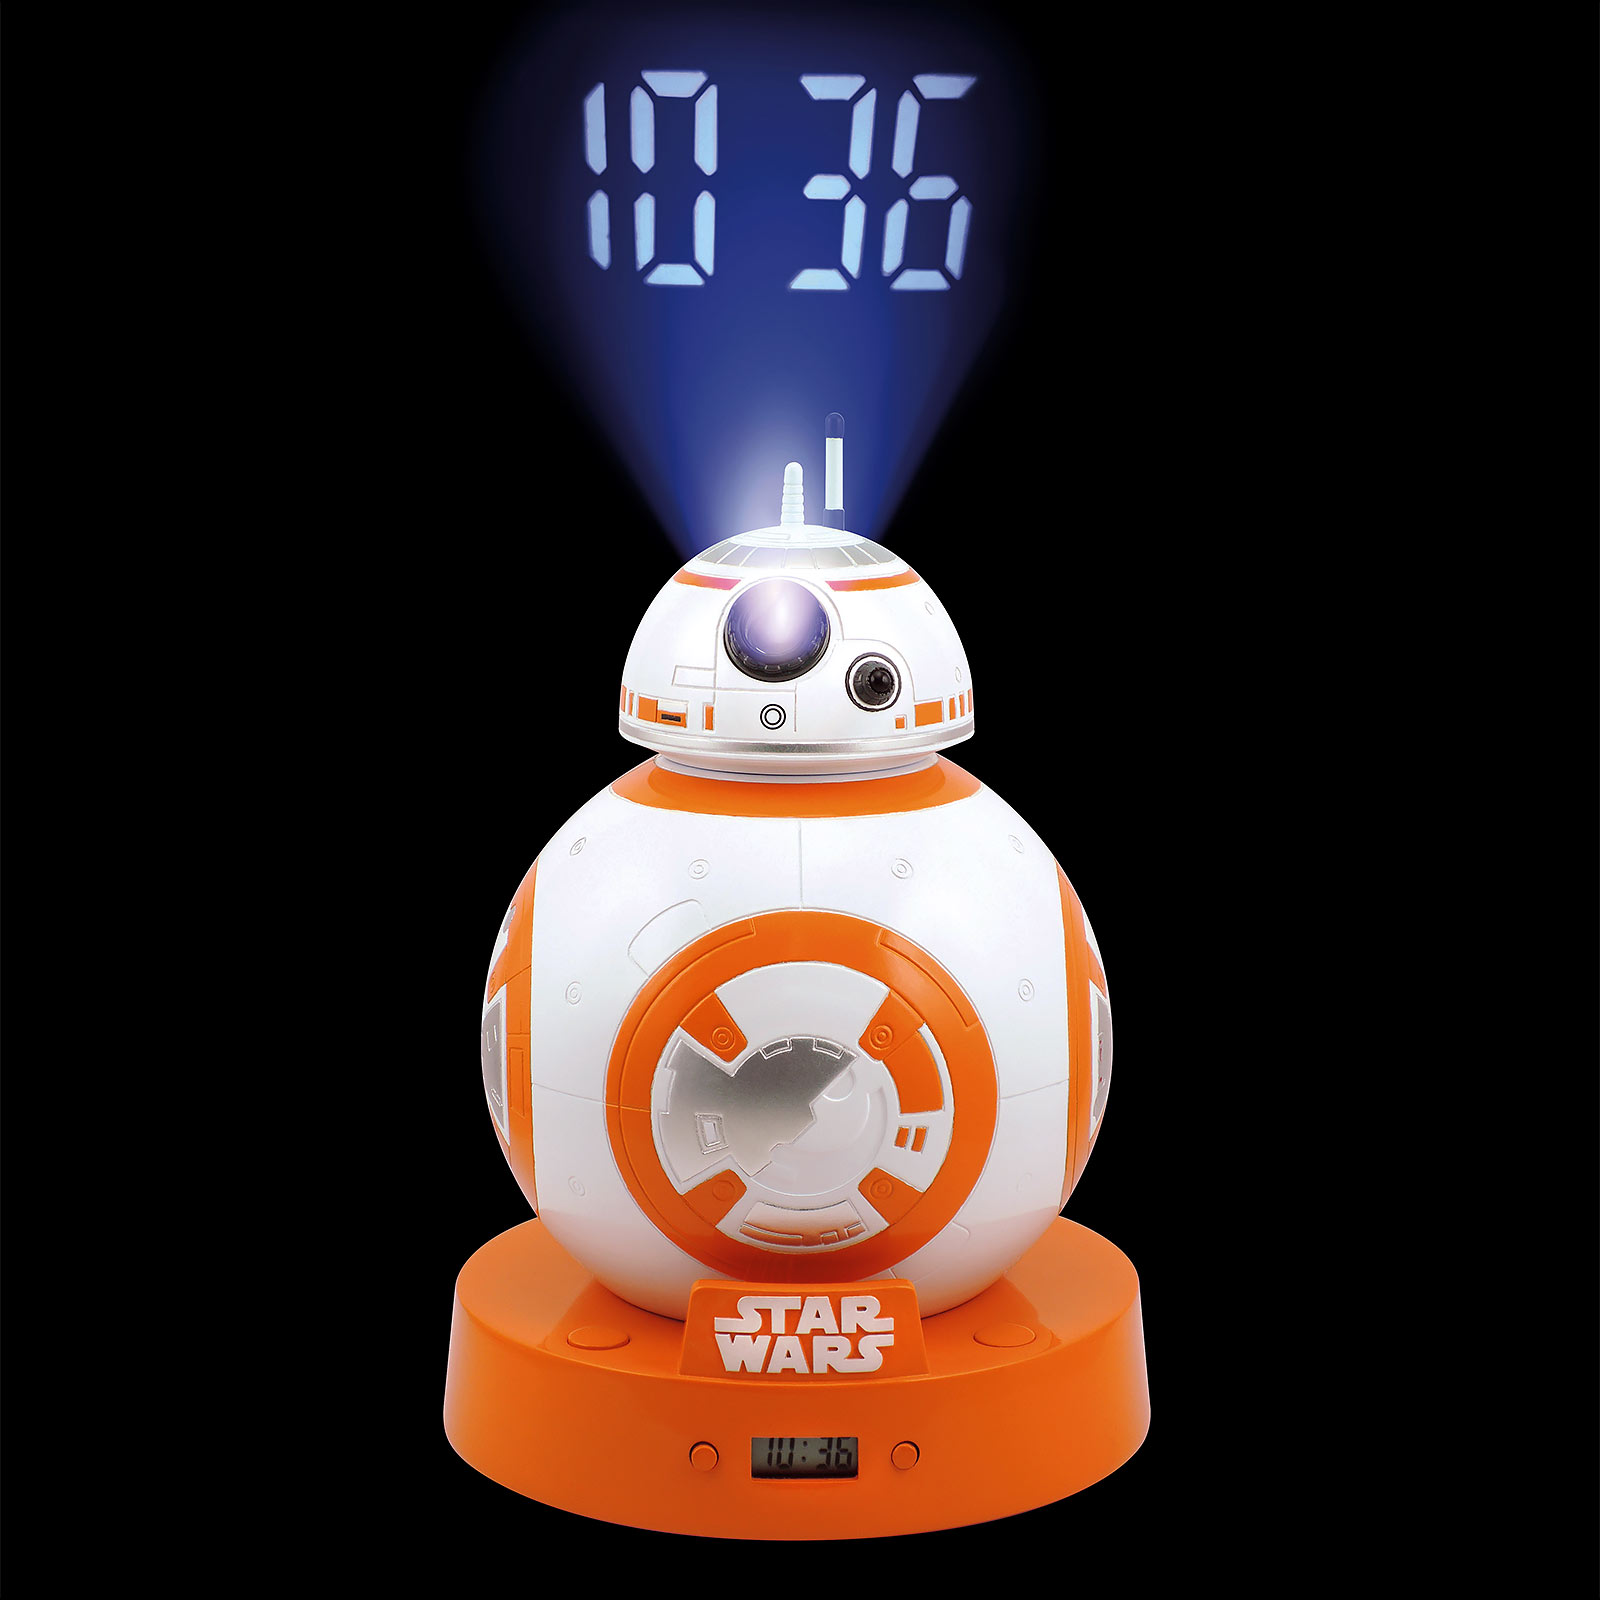 Star Wars - BB-8 Alarm Clock with Projection and Sound